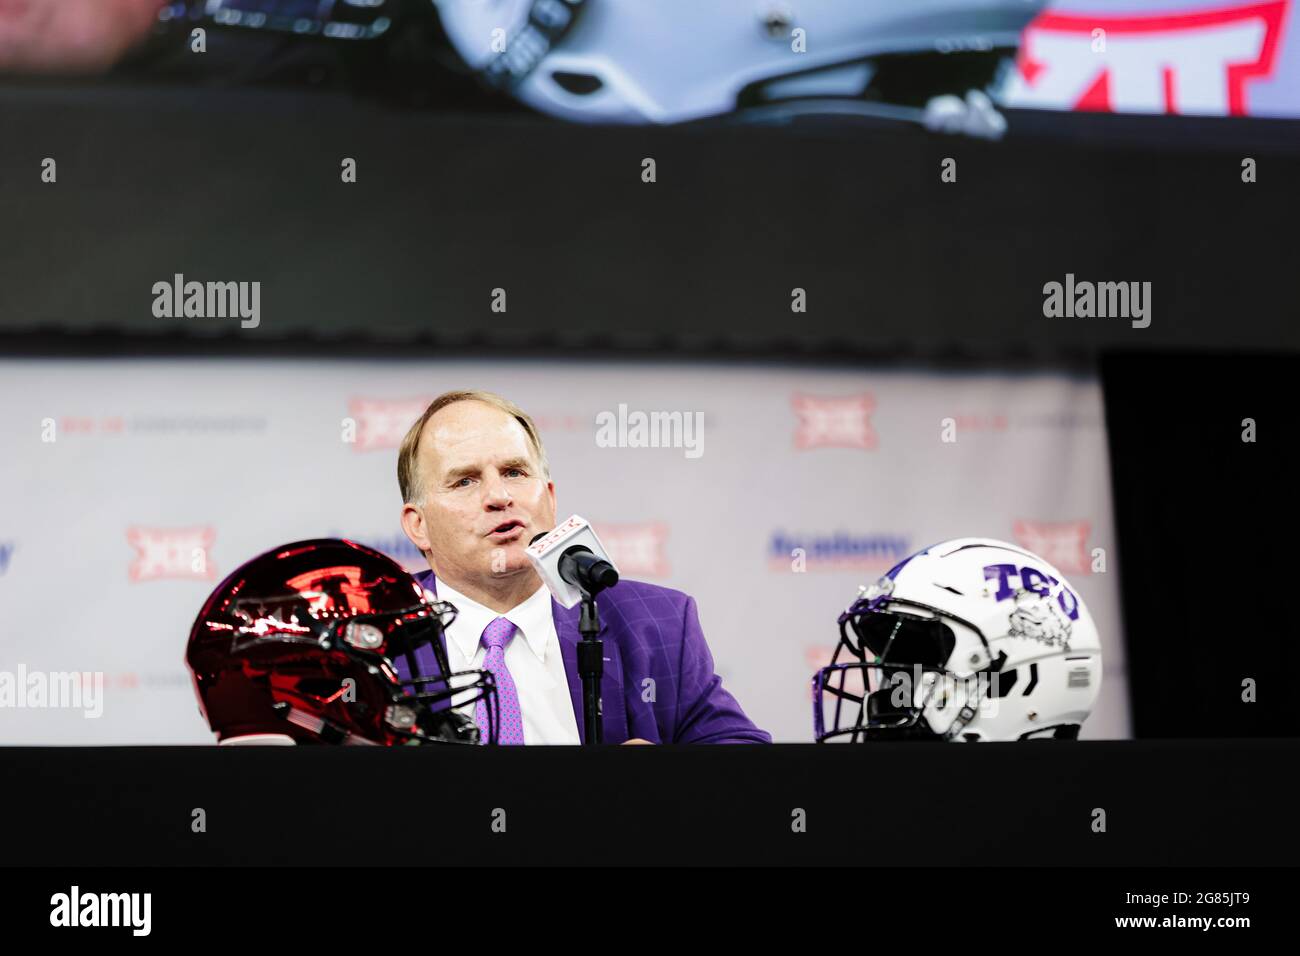 TCU Horned Frogs head coach Gary Patterson speaks during Big 12 Conference media day, Wednesday, July 14, 2021, in Arlington, TX. (Mario Terrana/Image Stock Photo